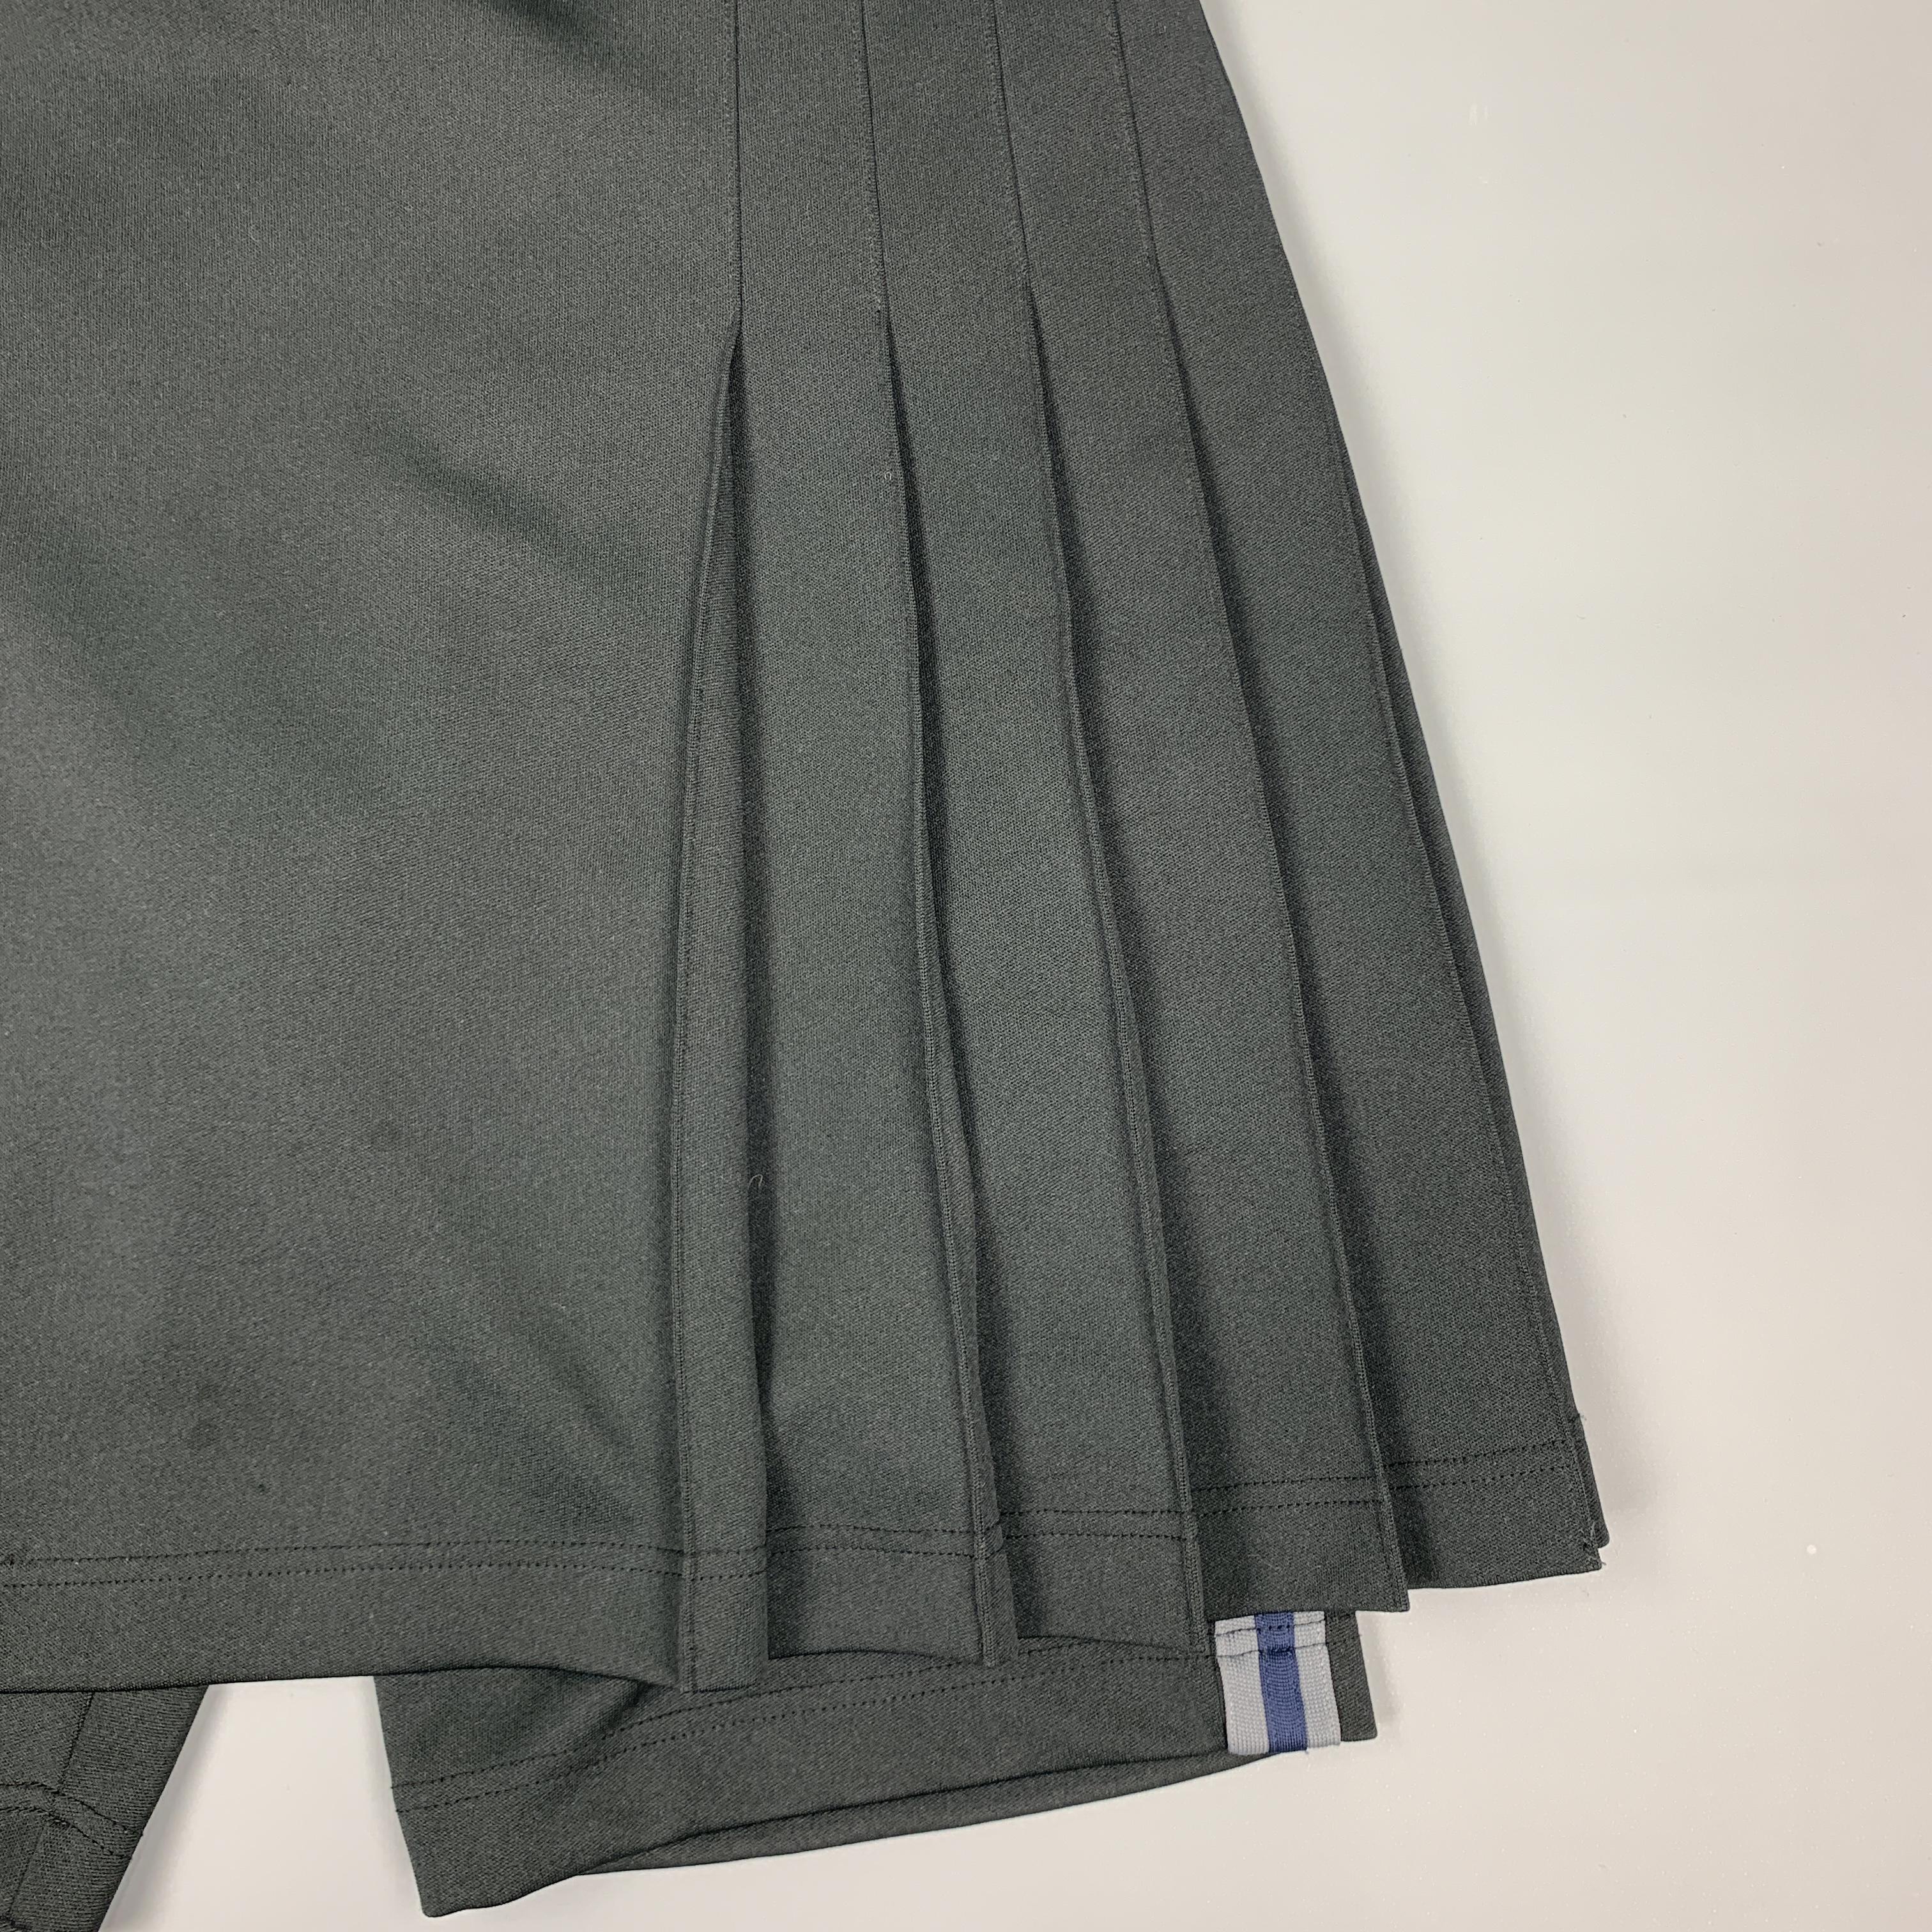 COMME des GARCONS HOMME PLUS skort shorts come in black knit fabric with blue and grey webbing stripe sides and pleated kilt overlay panel with buckle closure.
 
Excellent Pre-Owned Condition.
Marked: S
 
Measurements:
 
Waist: 32 in.
Rise: 12